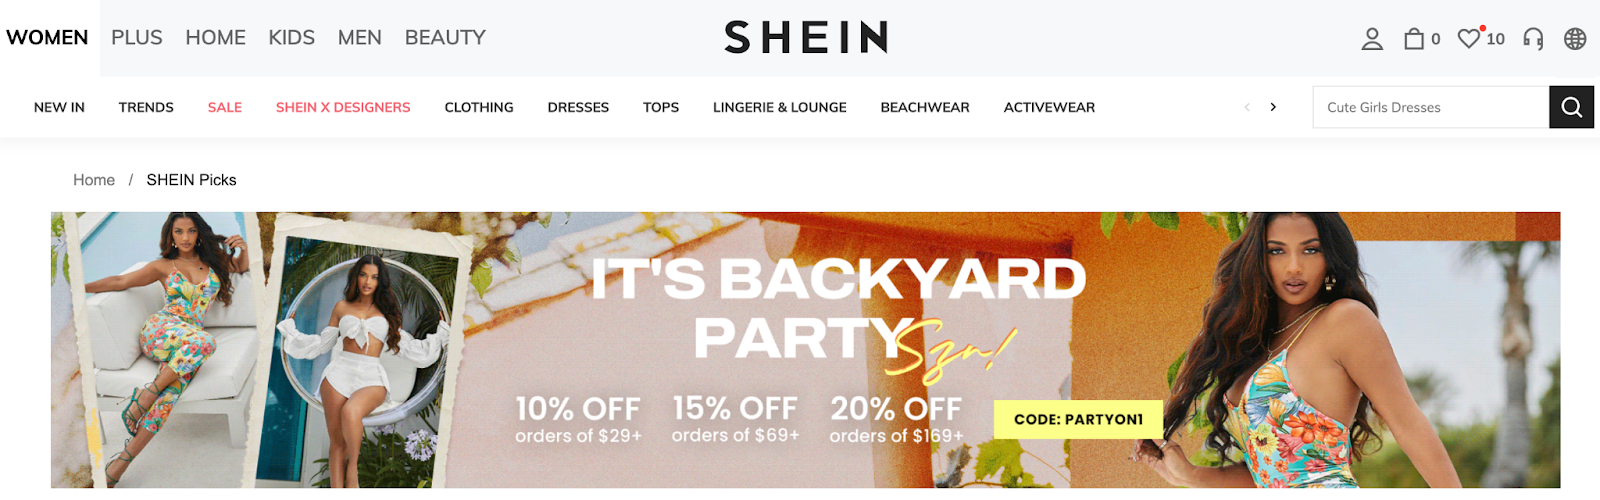 SHEIN HAUL WITH AFFORDABLE SKIMS DUPES (DISCOUNT CODE INCLUDED